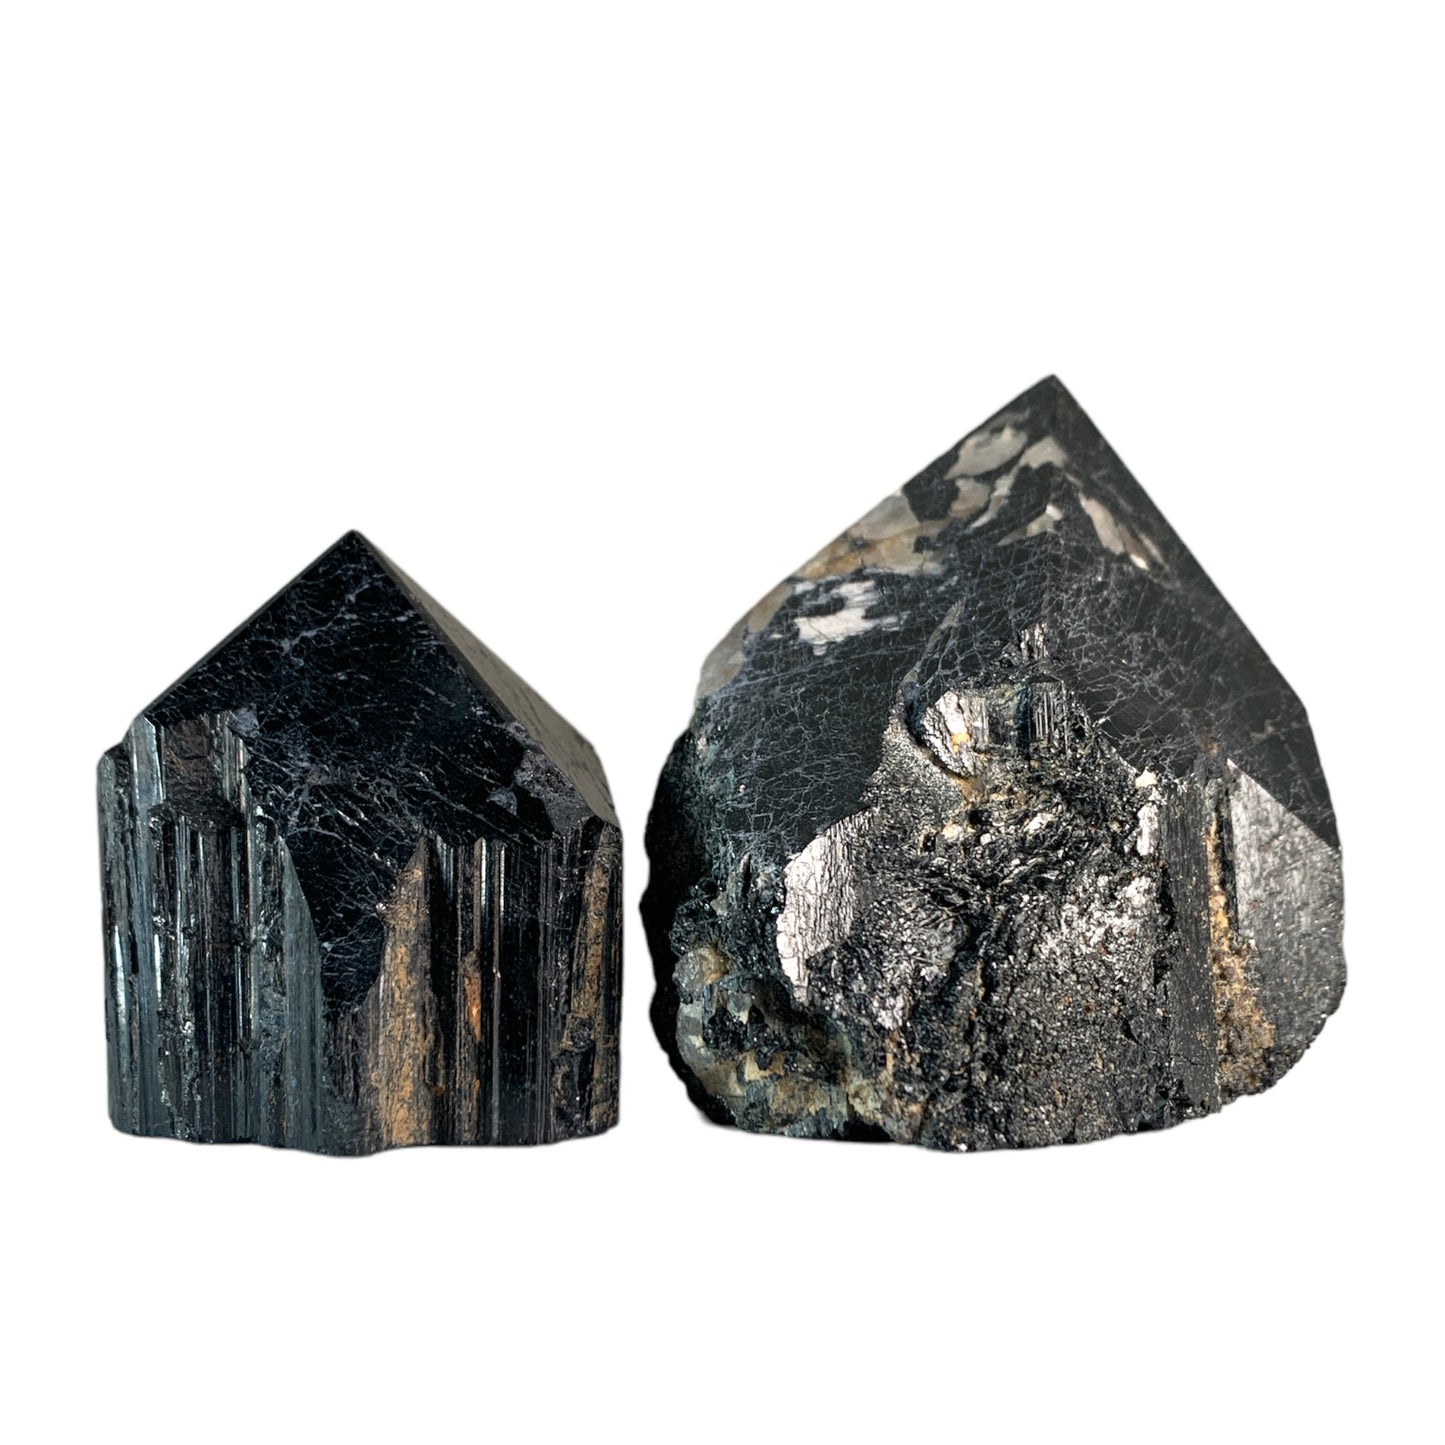 Black Tourmaline Natural Cut Base Points - Assorted Sizes - Sold by the gram - India - NEW1122- Chunky Polished Points